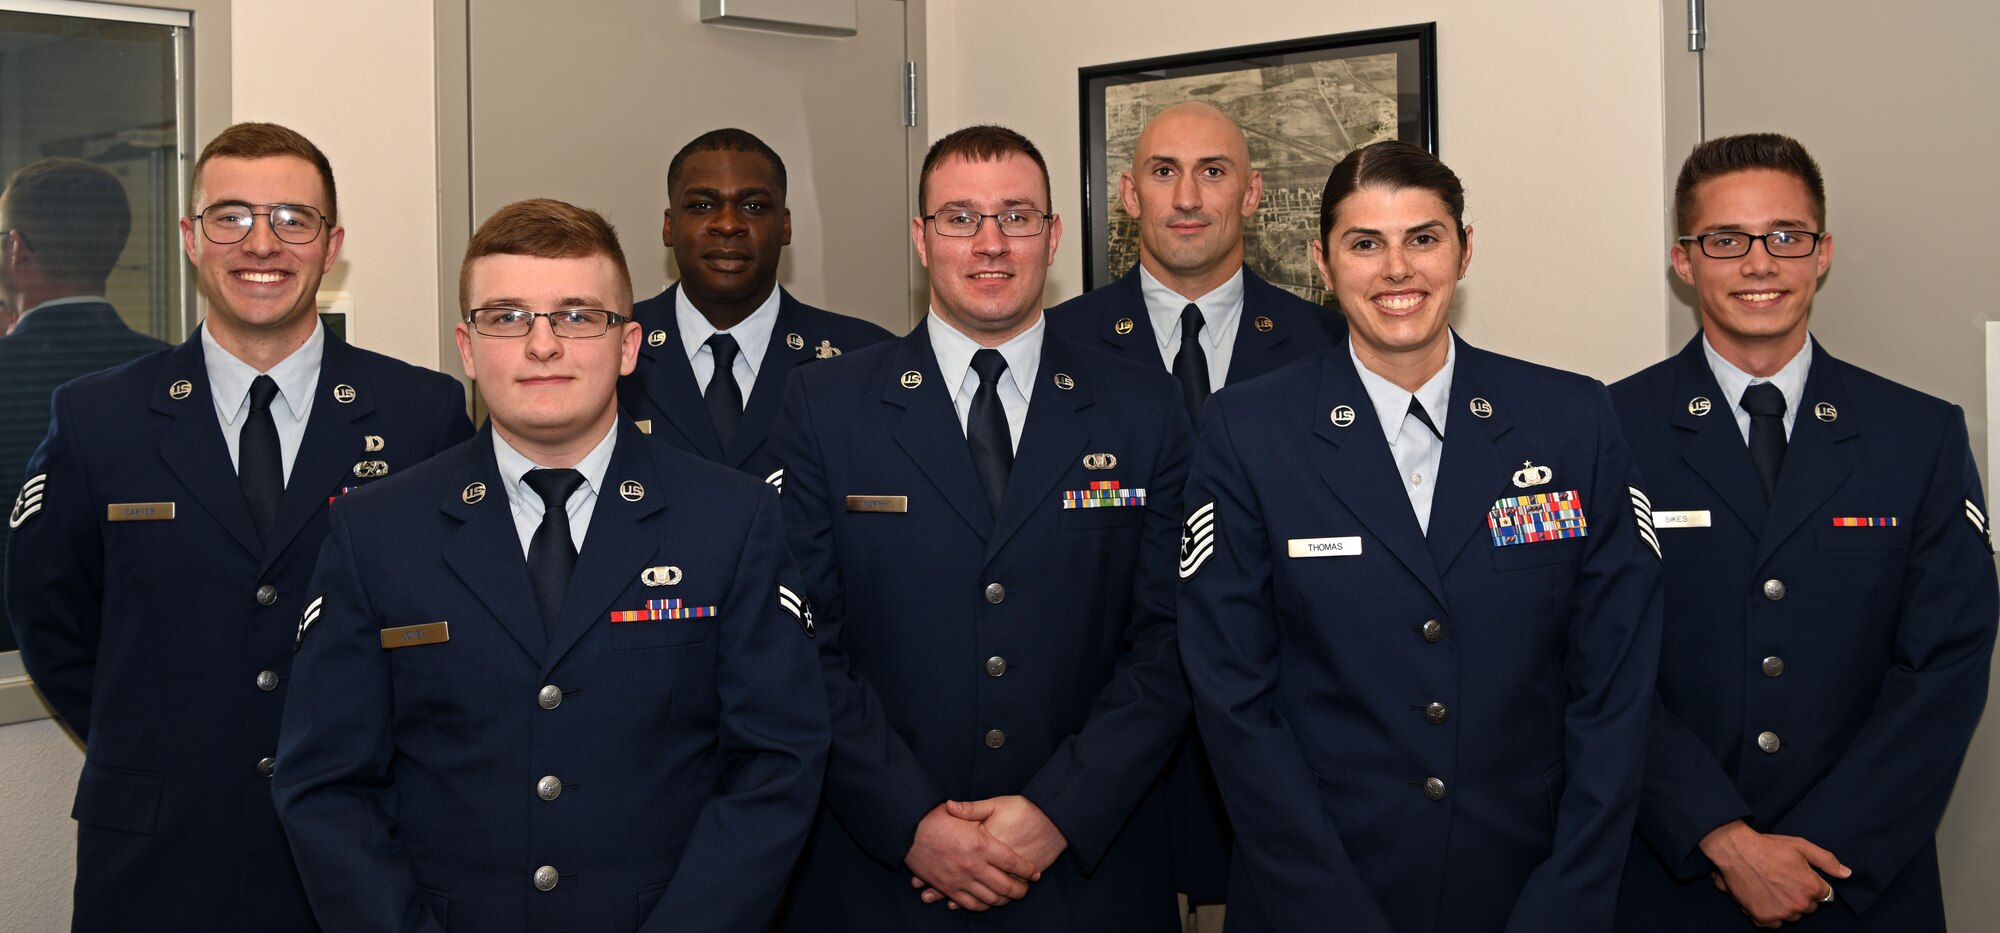 Goodfellow Command Post team gathered for a group photo at the Norma Brown building at Goodfellow Air Force Base May 20, 2019. The base command post is the central command point for mission operations.